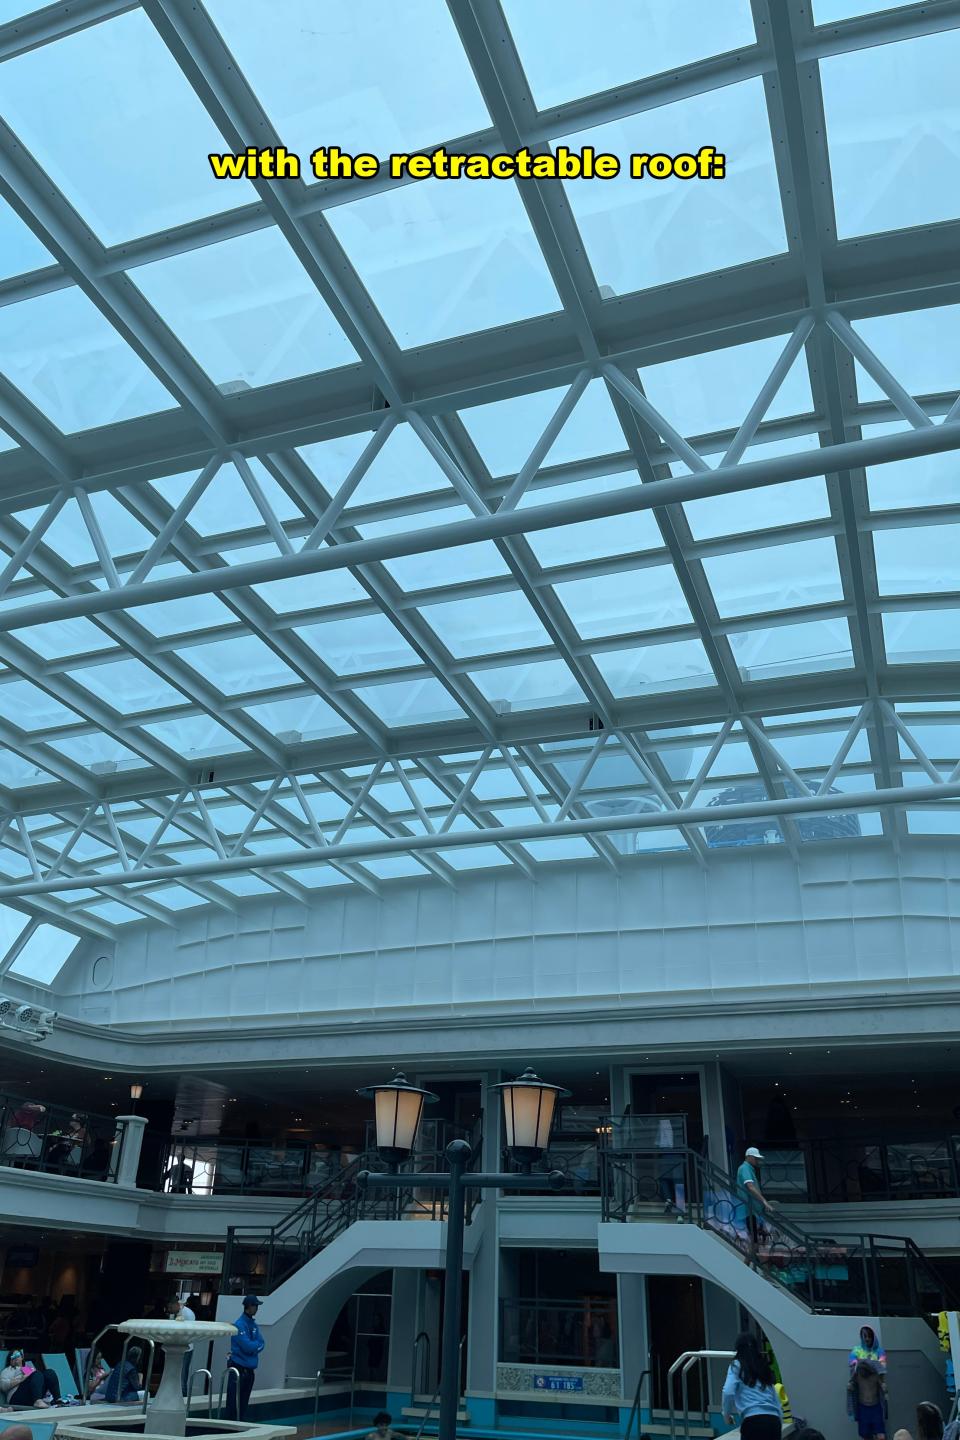 Glass ceiling structure of a building with geometric patterns, text overlay mentioning a retractable roof. People visible below